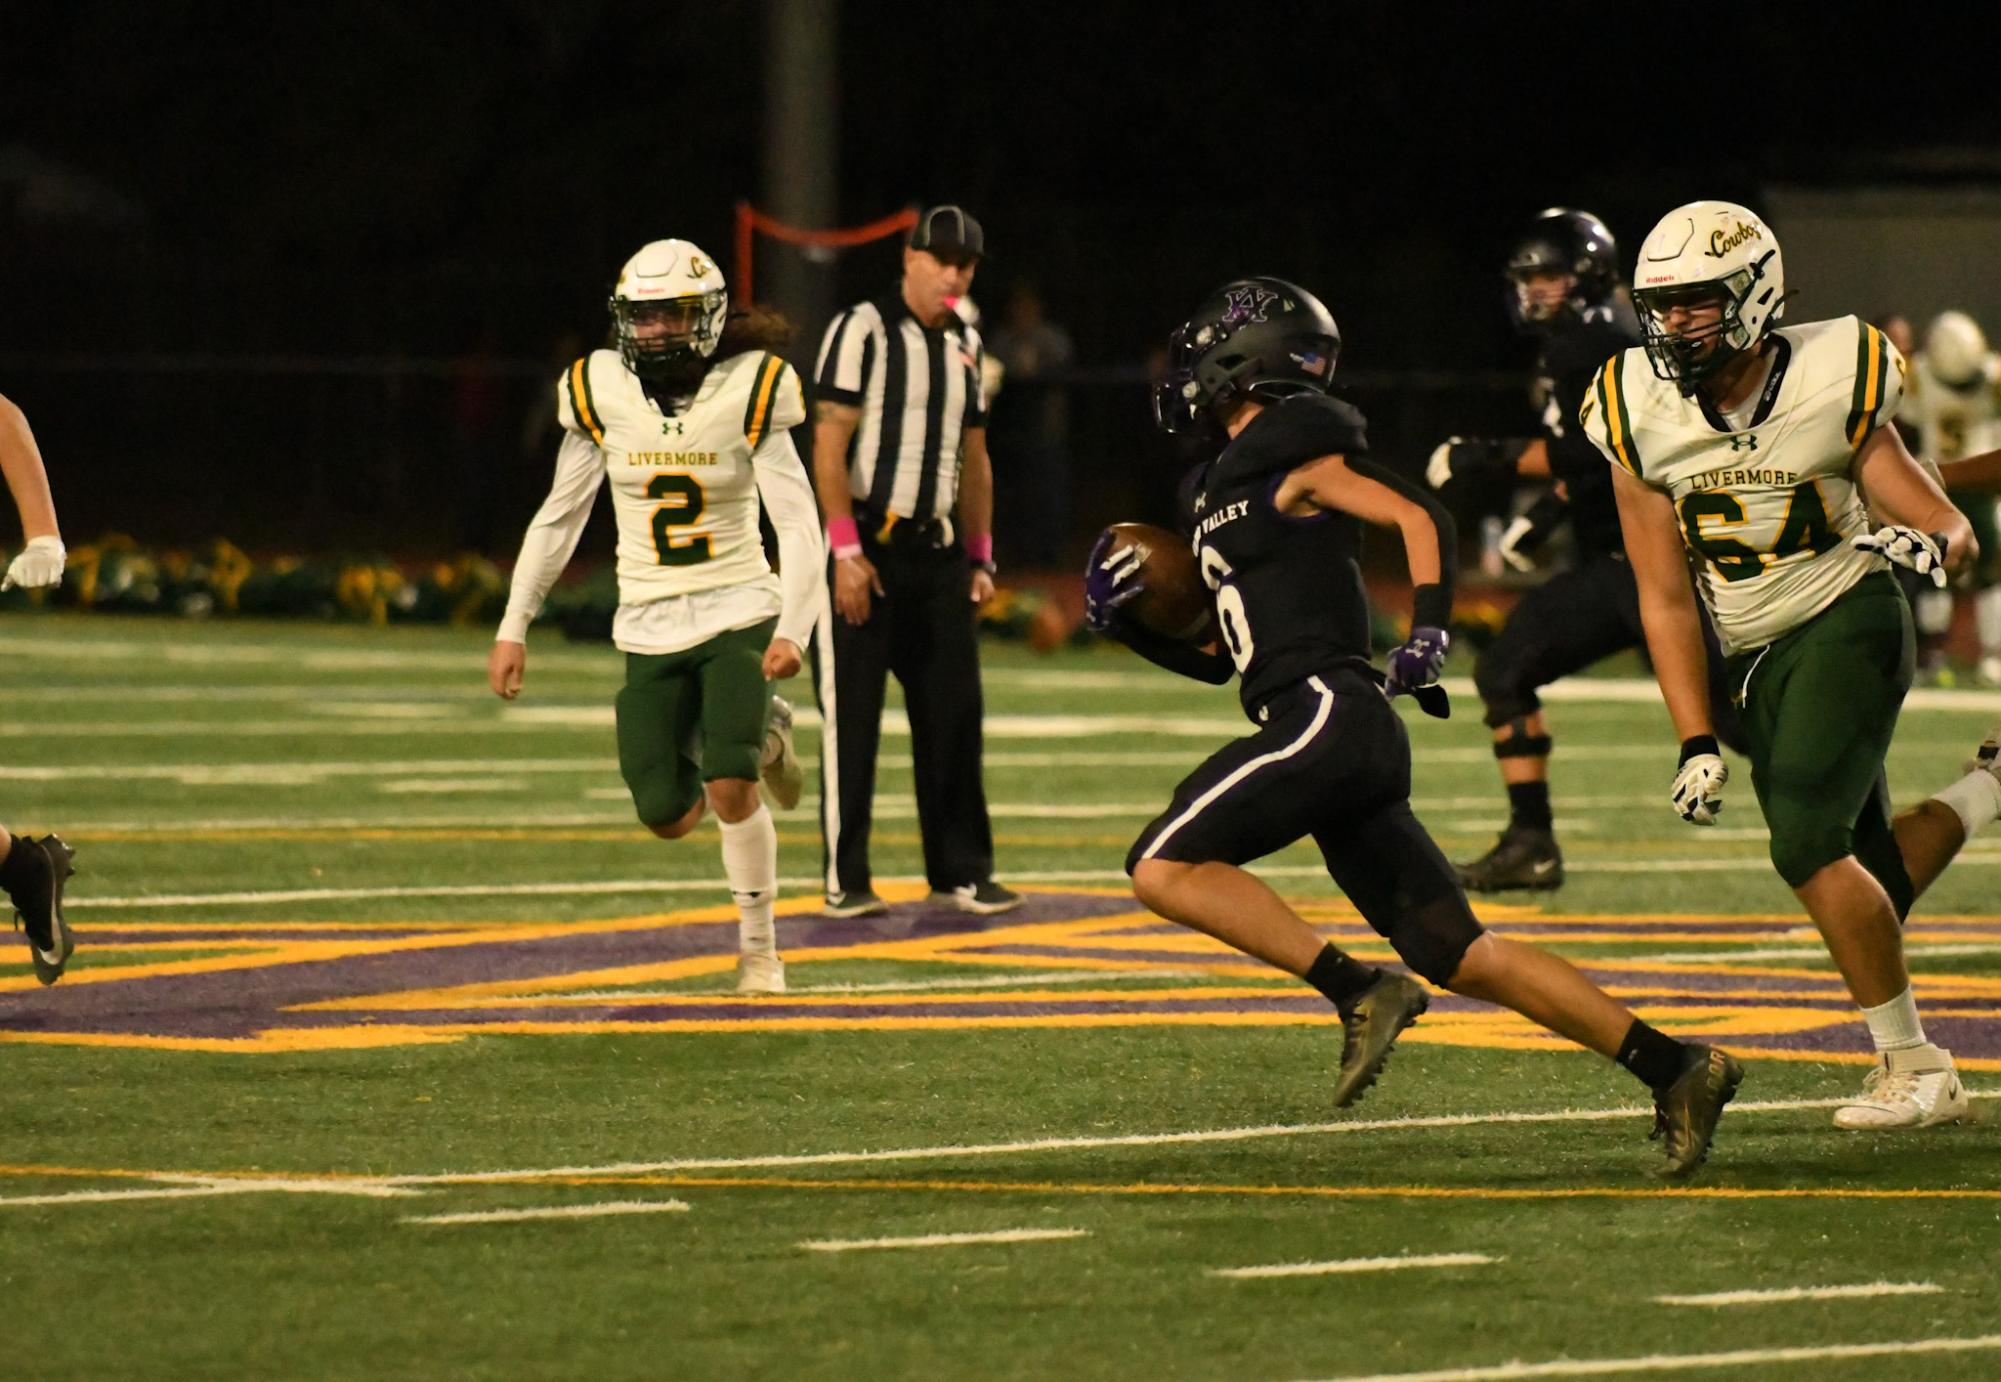 Amador+Valley+Football+defeats+Livermore+High+42-7+to+continue+winning+streak